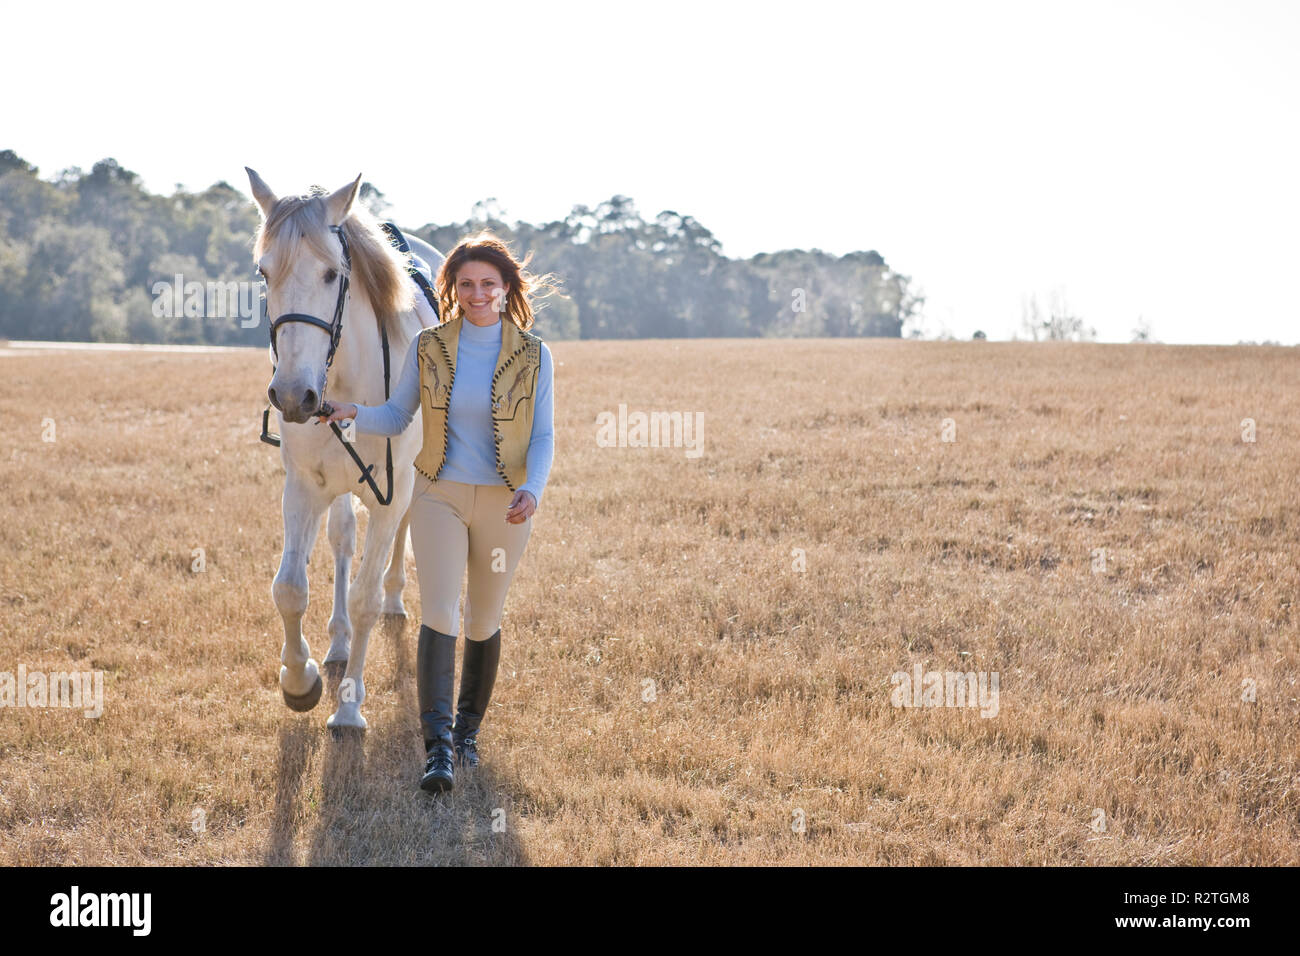 Woman walking with her horse across a field Stock Photo